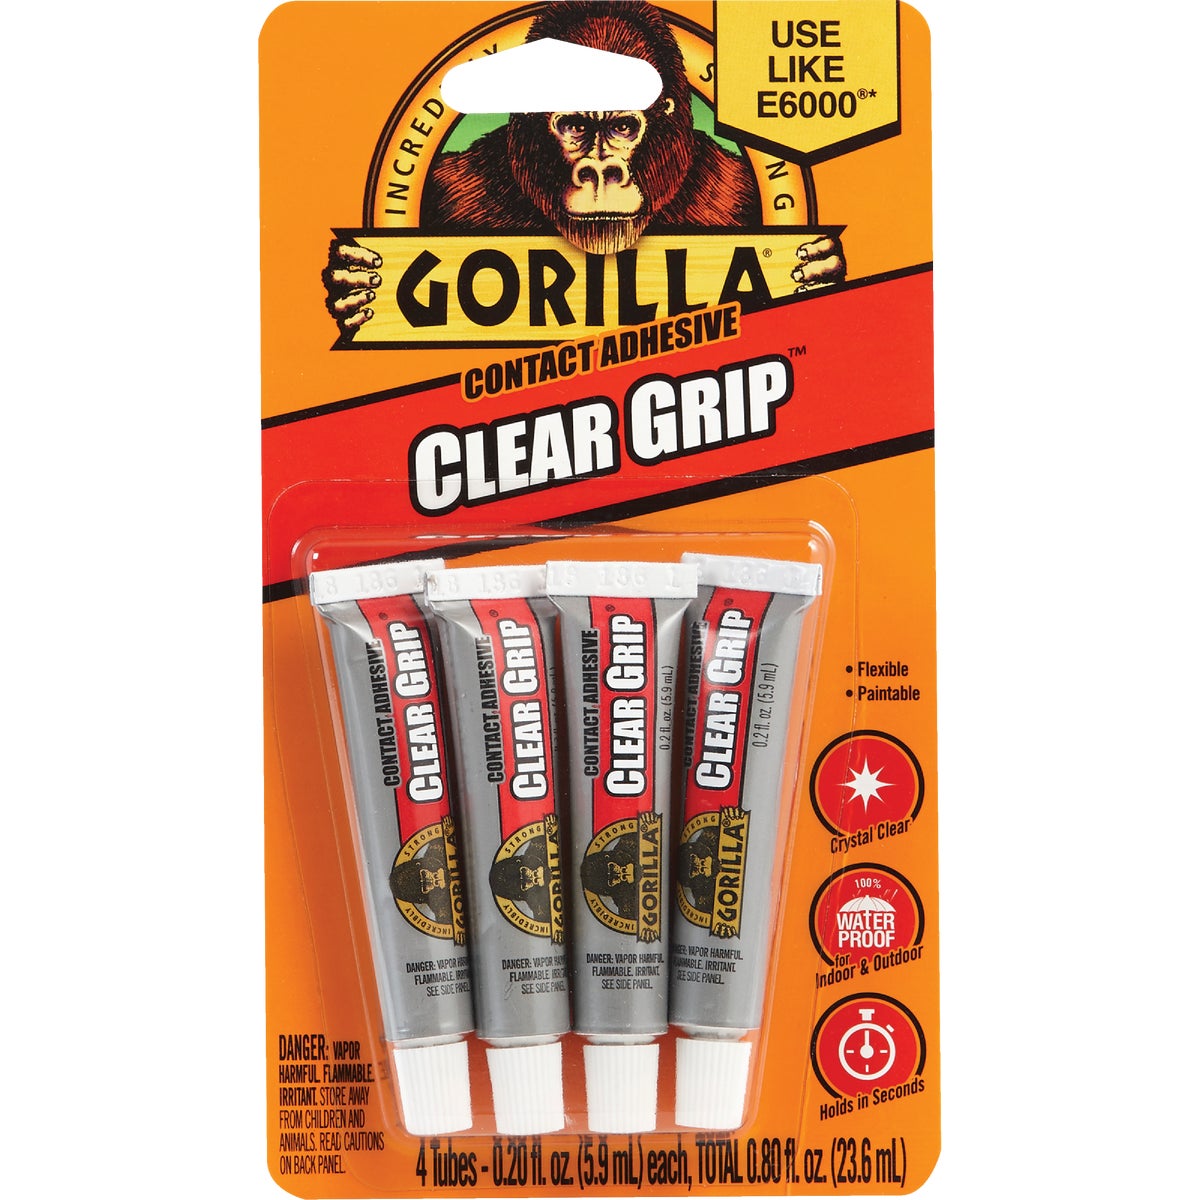 Item 303959, Gorilla Clear Grip is a flexible, fast-setting, crystal clear contact 